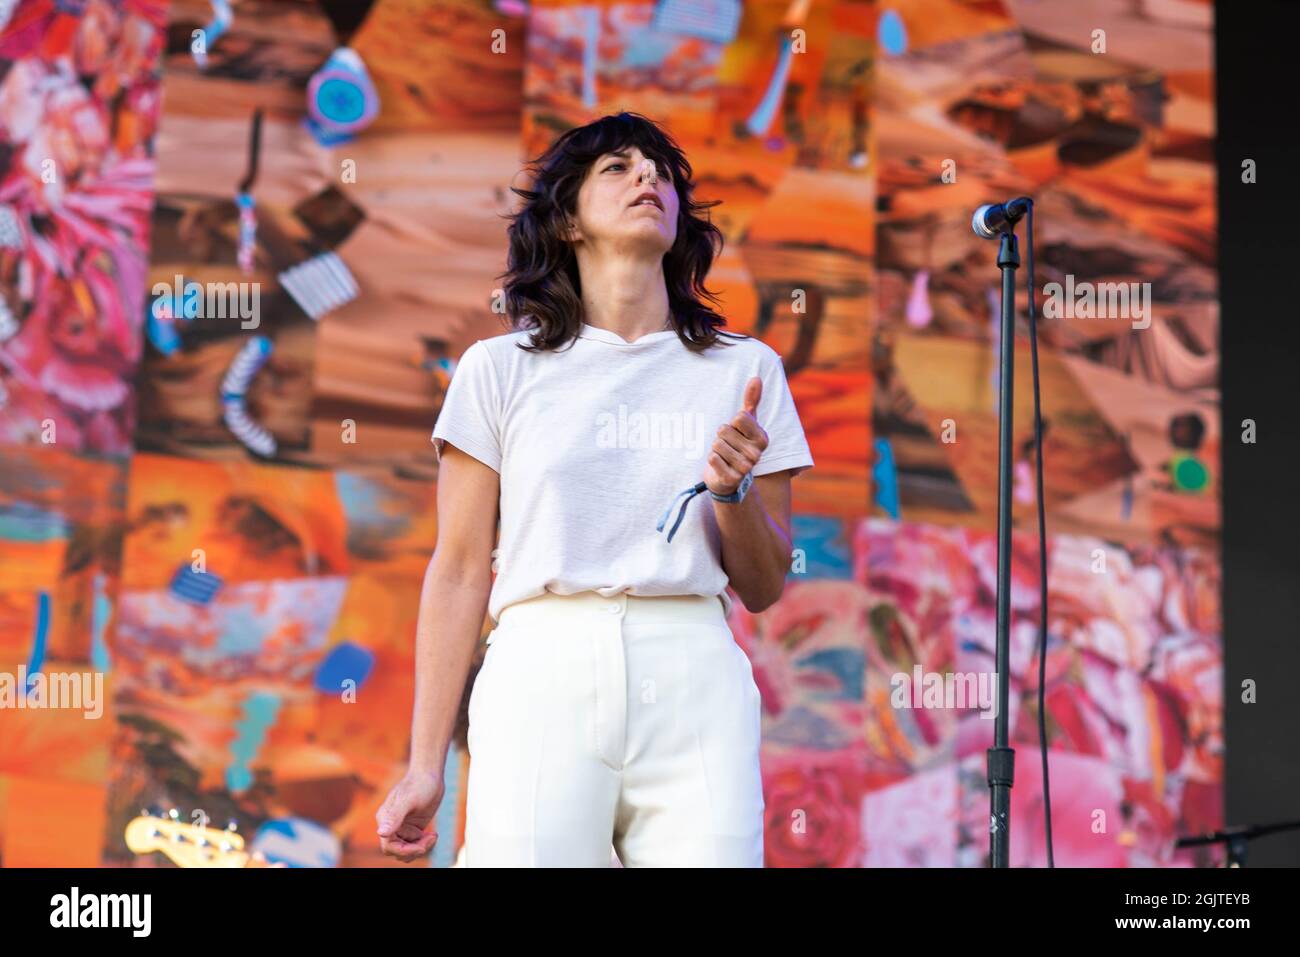 Chicago, IL, USA. 10th Sep, 2021. Eleanor Friedberger performing with Fiery Furnaces at Pitchfork 2021 Day 1 in Chicago Illinois. The band's first performance since their breakup a decade ago in 2011. ( Credit: Annie Lesser/Image Space/Media Punch)/Alamy Live News Stock Photo